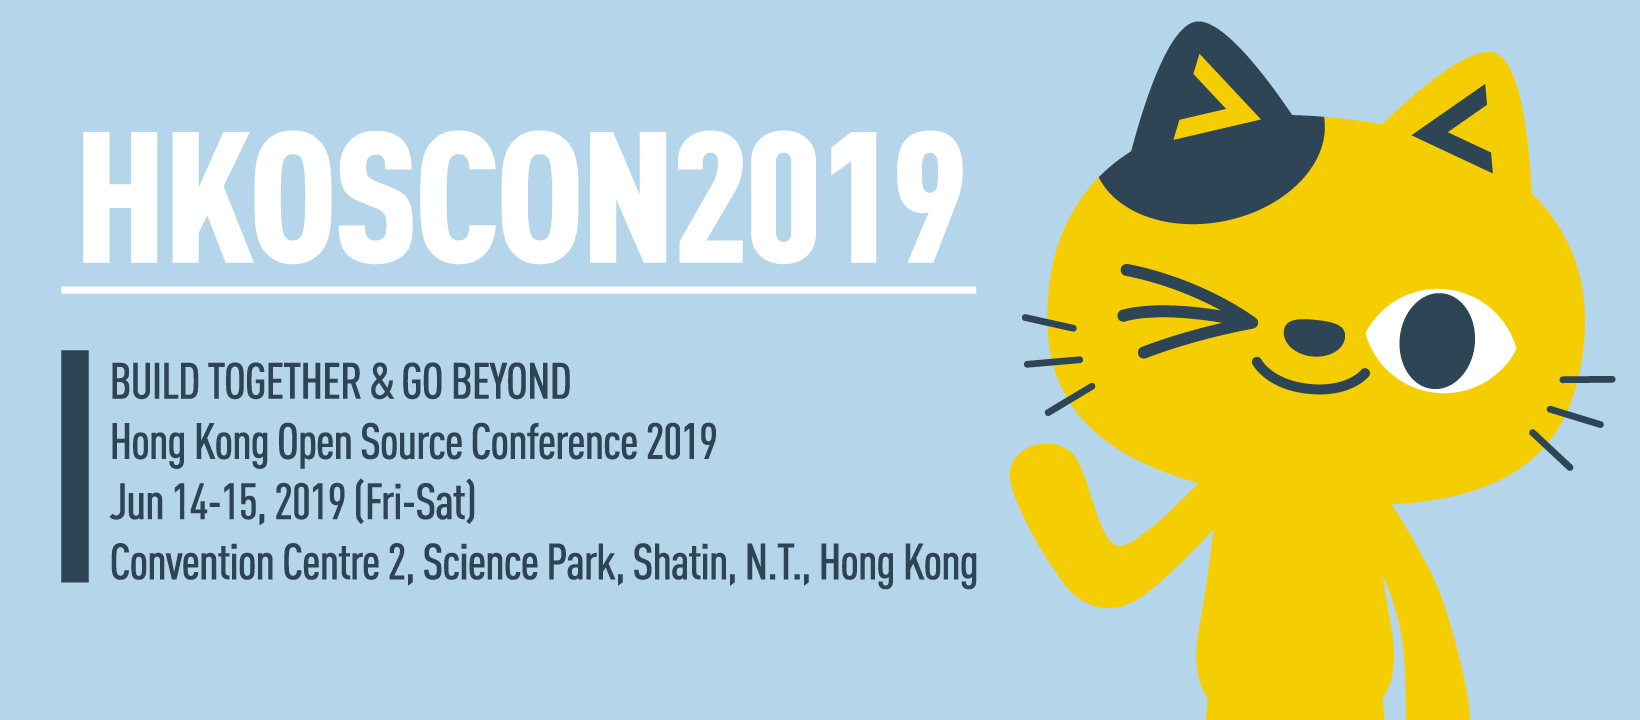 Event cover image for 國際出訪：2019 Hong Kong Open Source Conference 香港開源年會